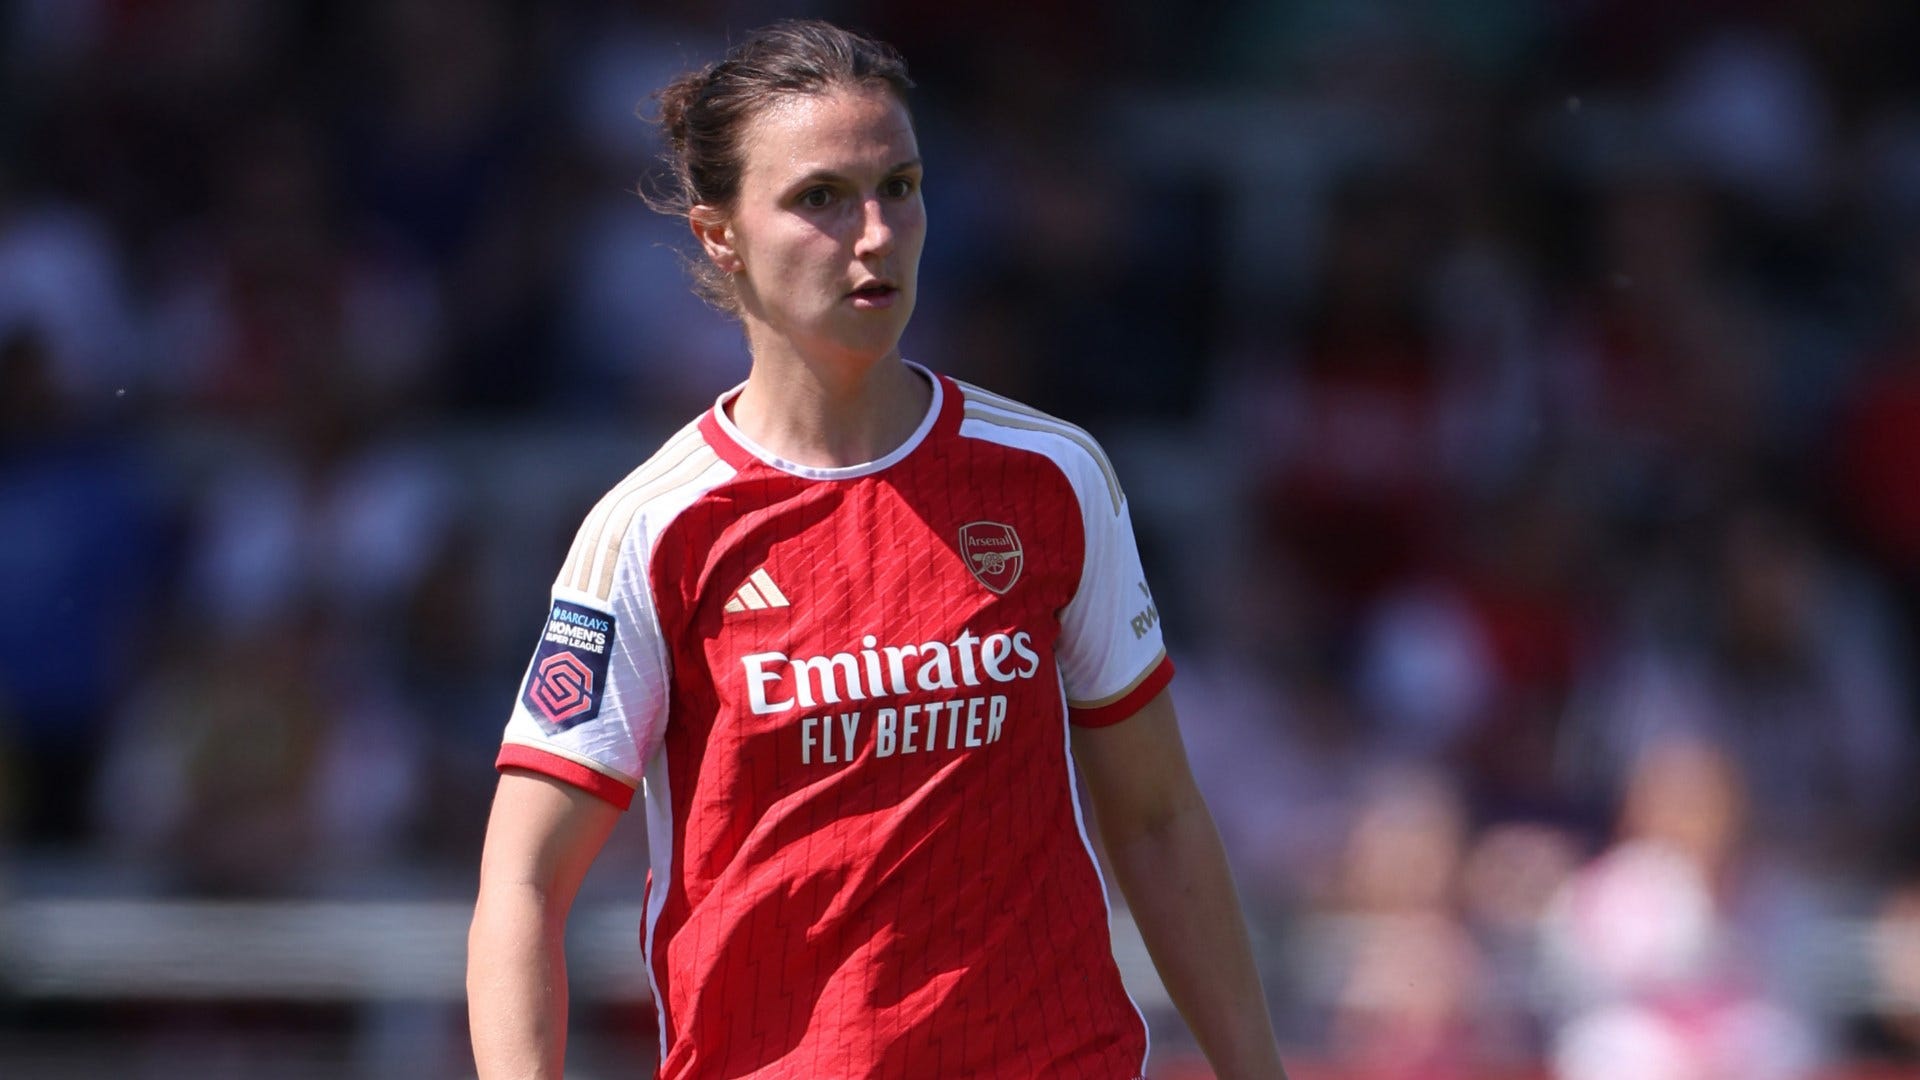 Leicester Women vs Arsenal Women Live stream, TV channel, kick-off time and where to watch Goal UK